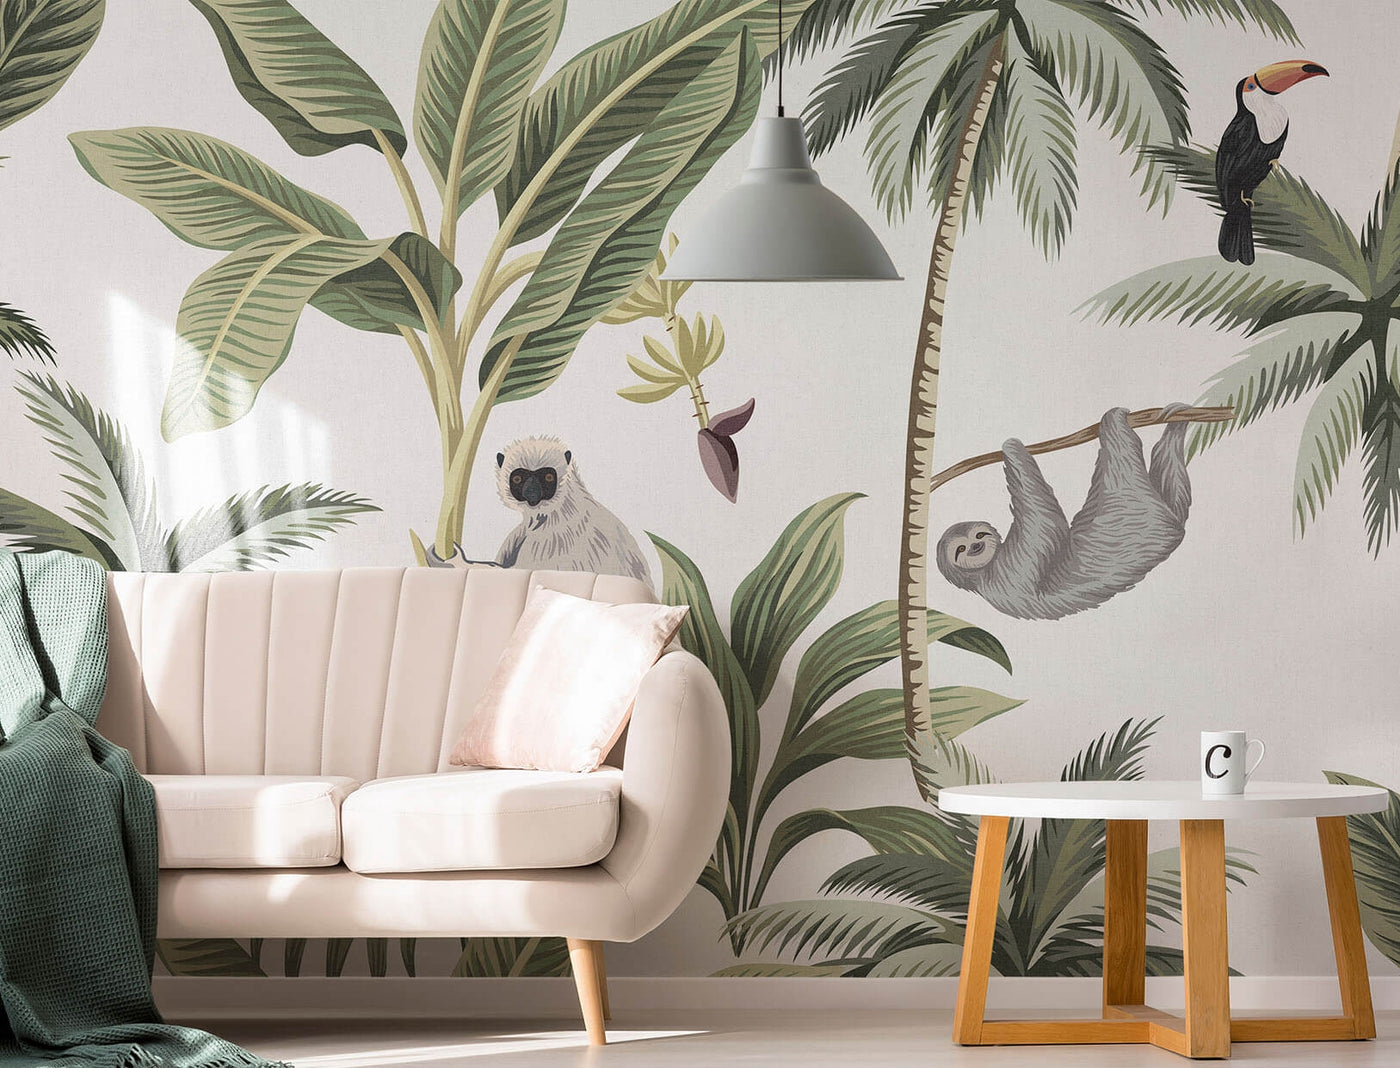 How to get the mural look with hand-painted, large-scale wallpaper | House  & Garden